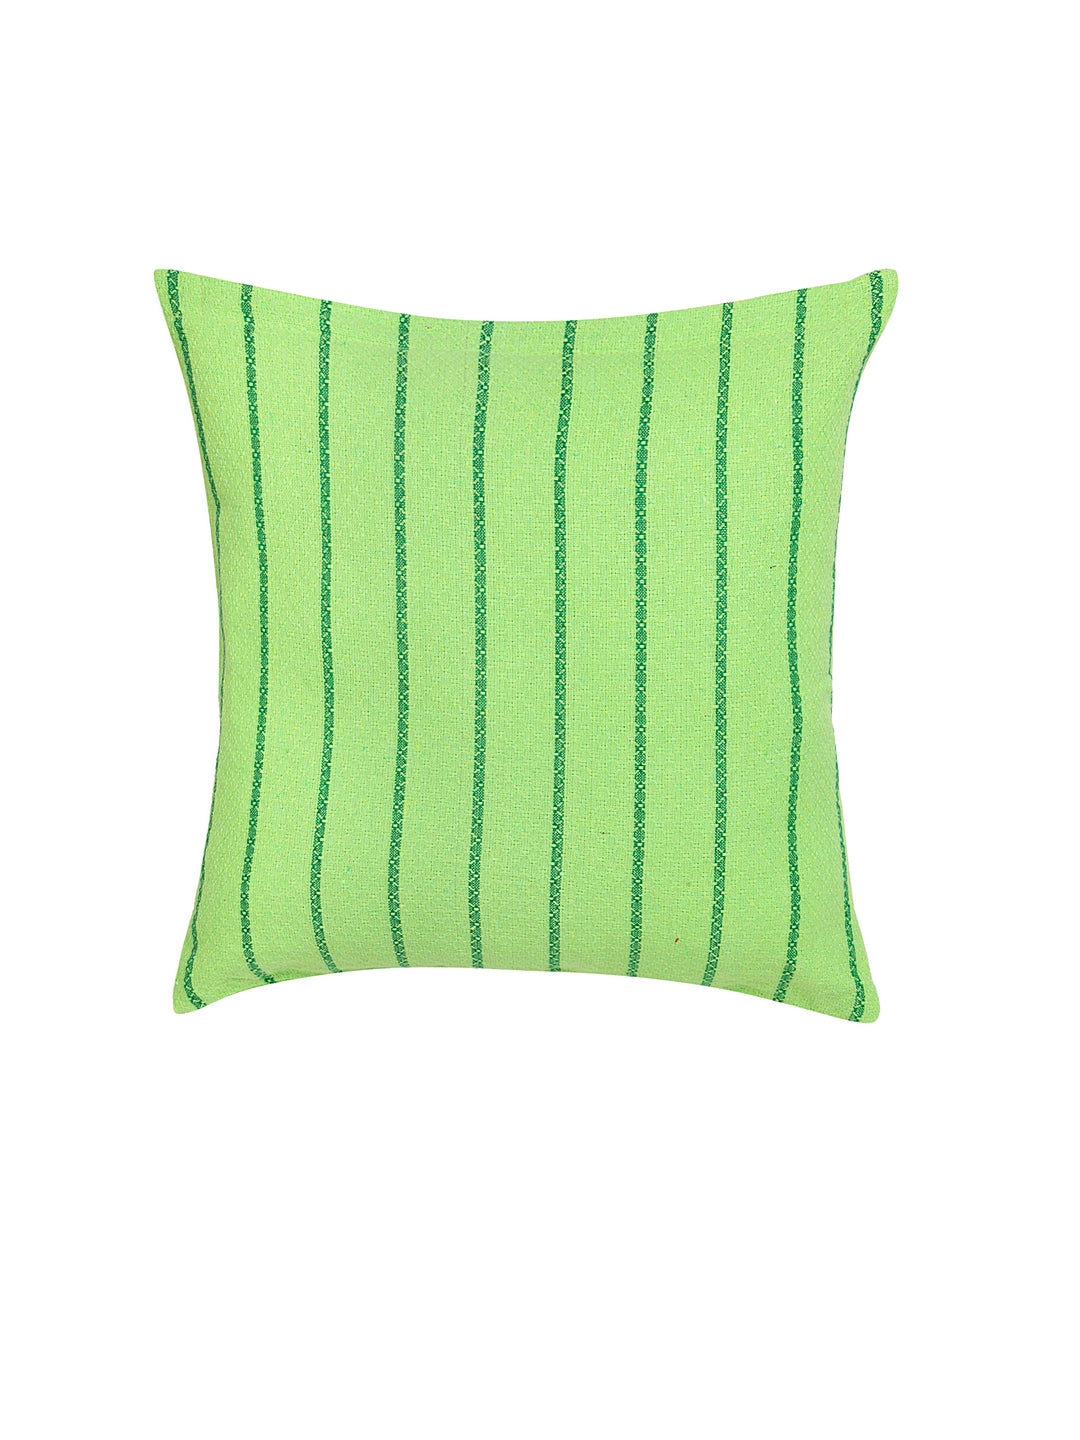 KLOTTHE Set of Five ParrotGreen Cotton Striped Cushion Covers